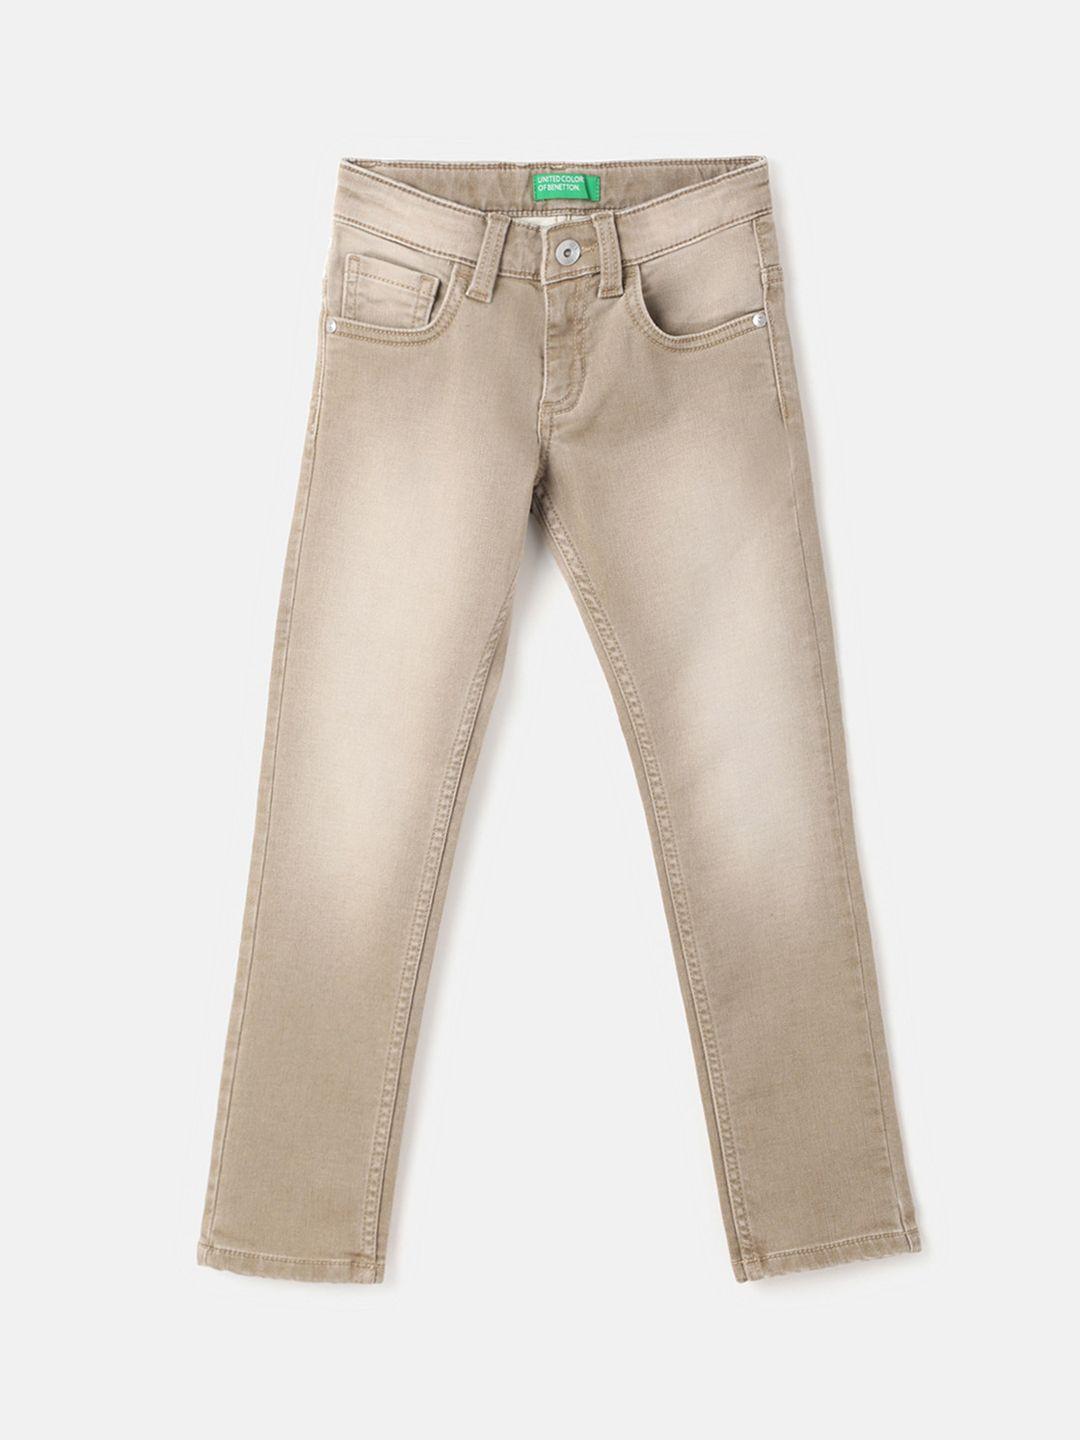 united colors of benetton boys slim fit light fade jeans